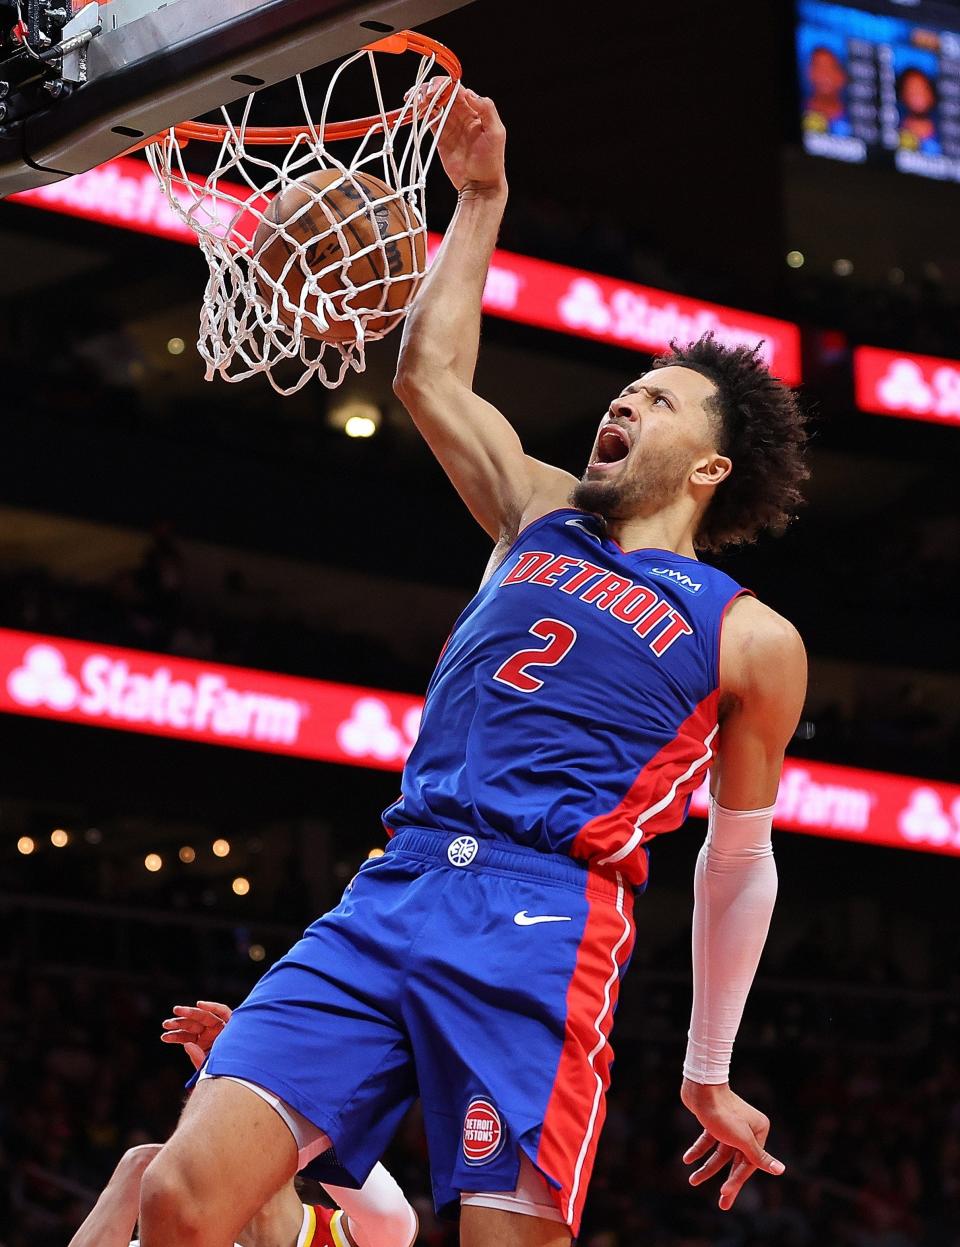 Pistons guard Cade Cunningham draws a foul as he dunks against Hawks guard Trae Young during the fourth quarter of the Pistons' 130-124 loss on Monday, Dec. 18, 2023, in Atlanta.